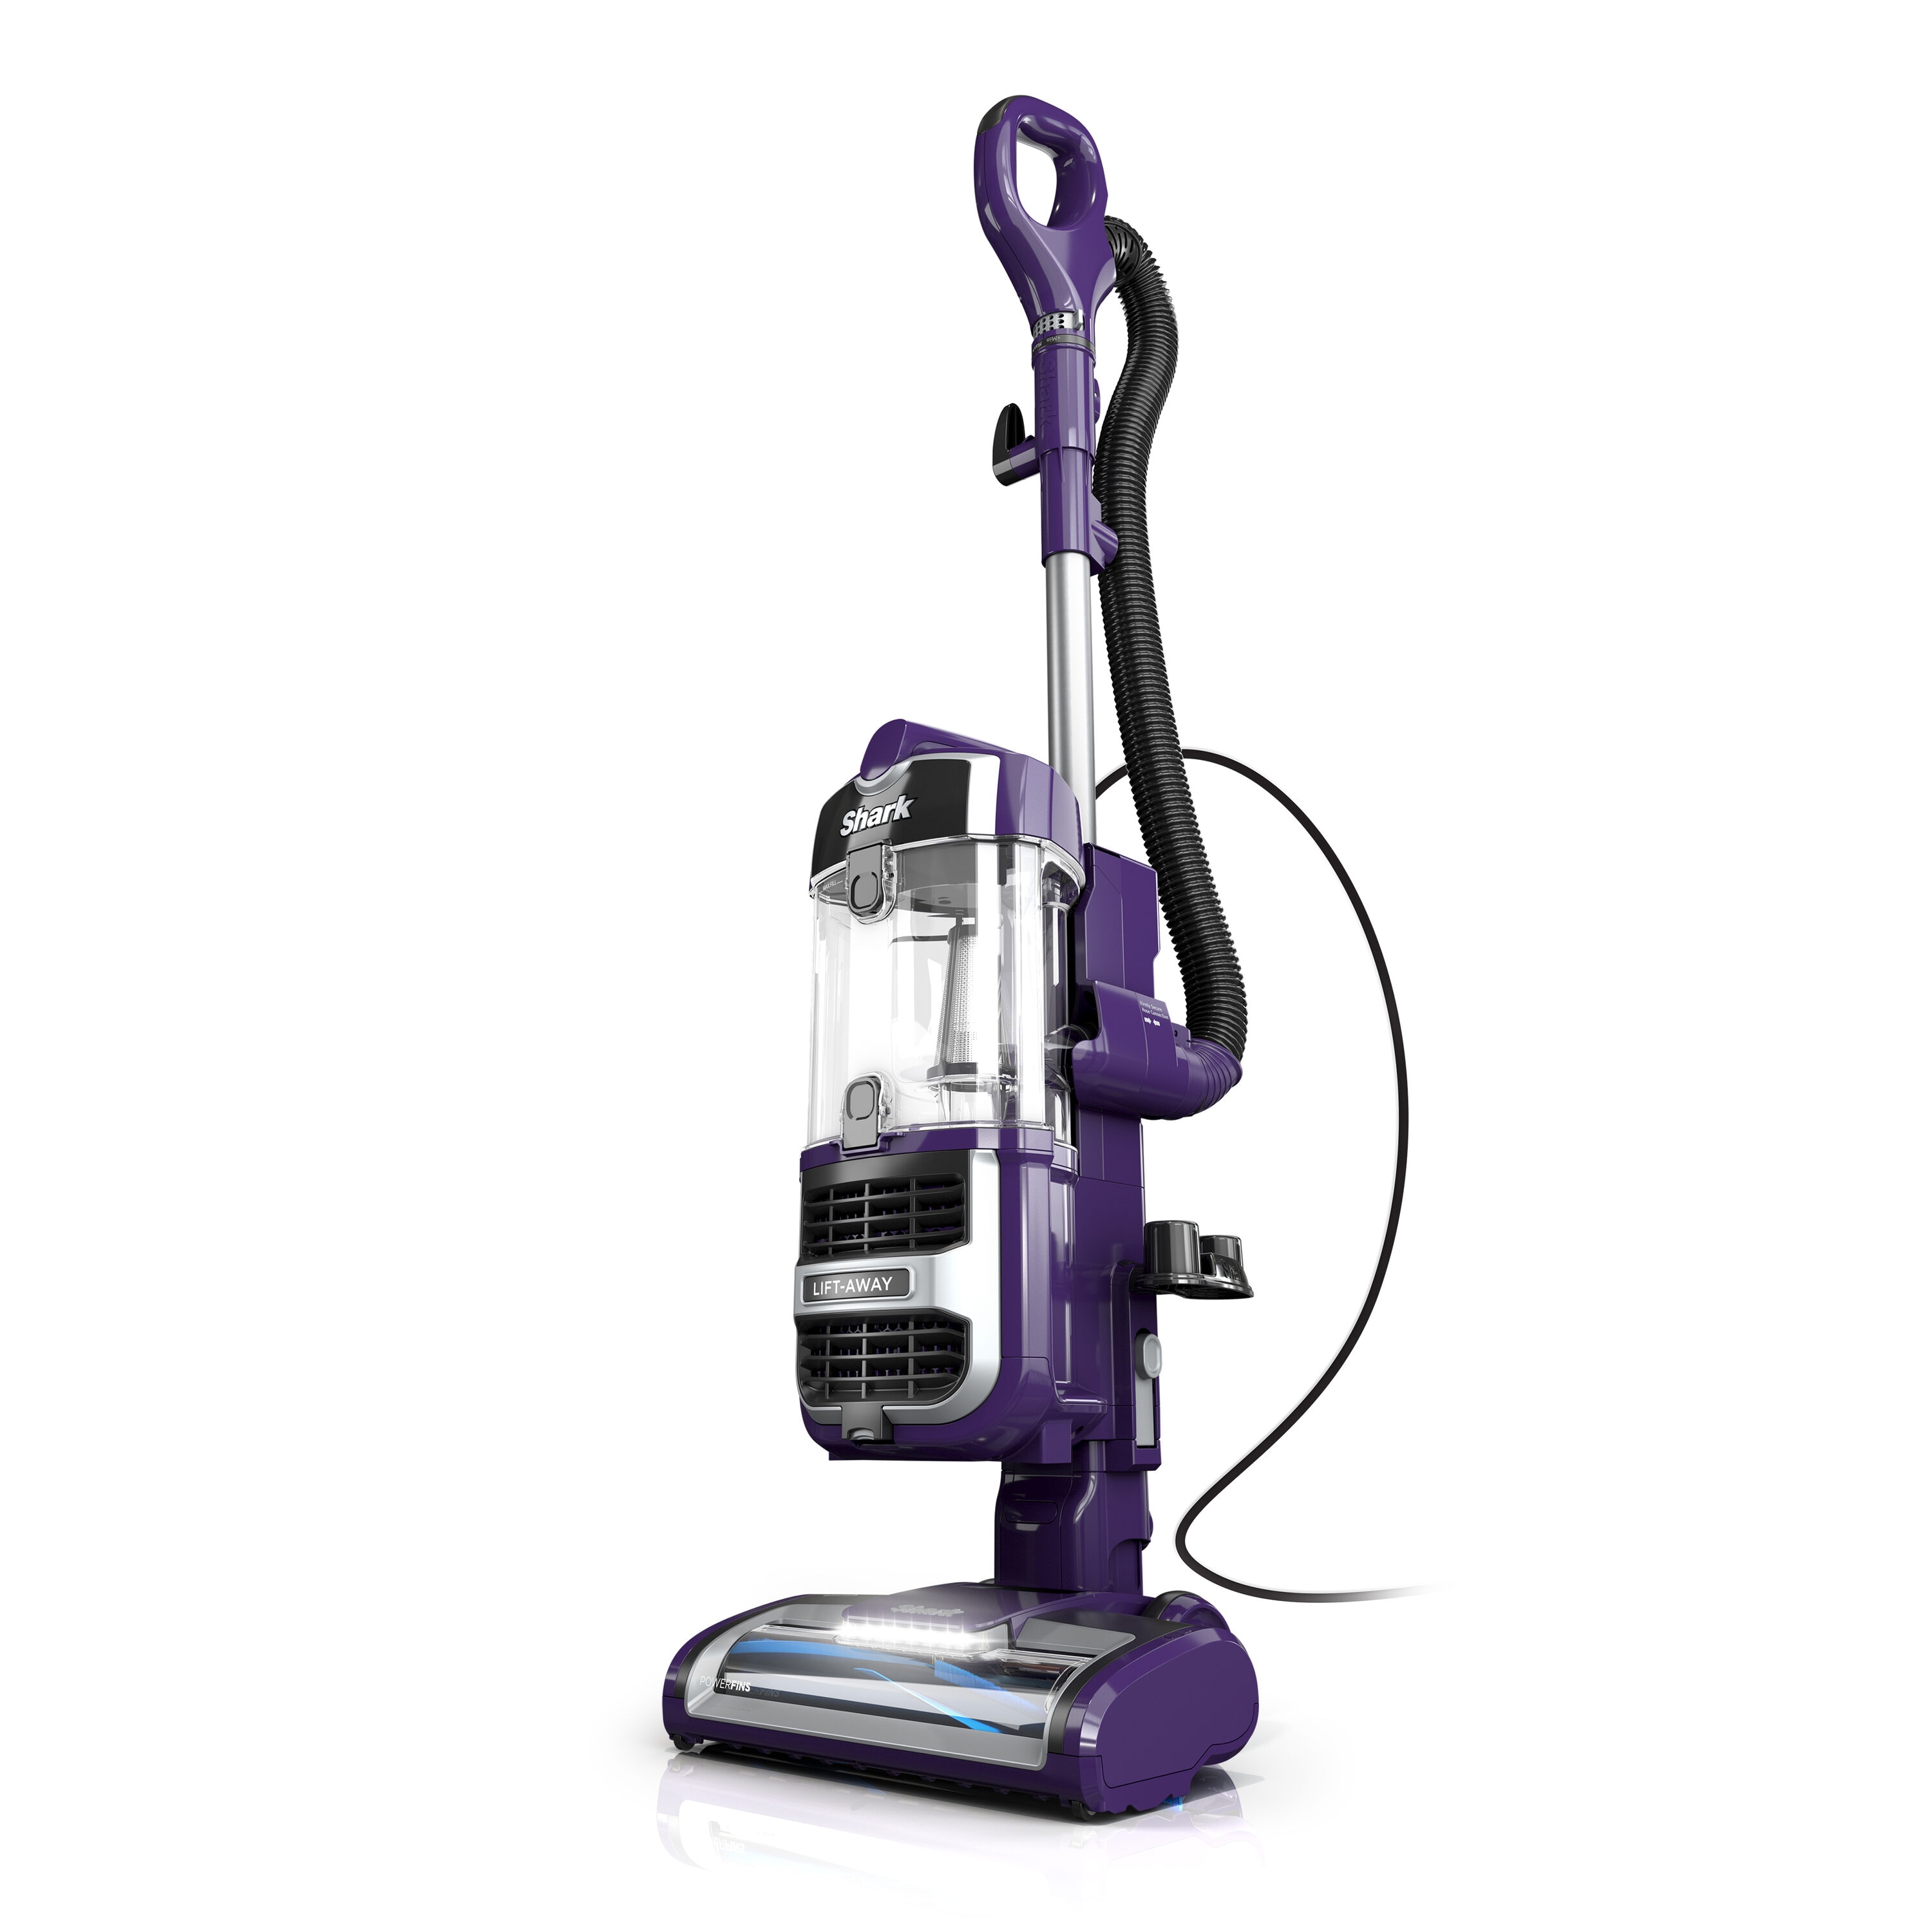 Black & Decker bdxurv309g Corded Bagless Upright Vacuum with HEPA Filter